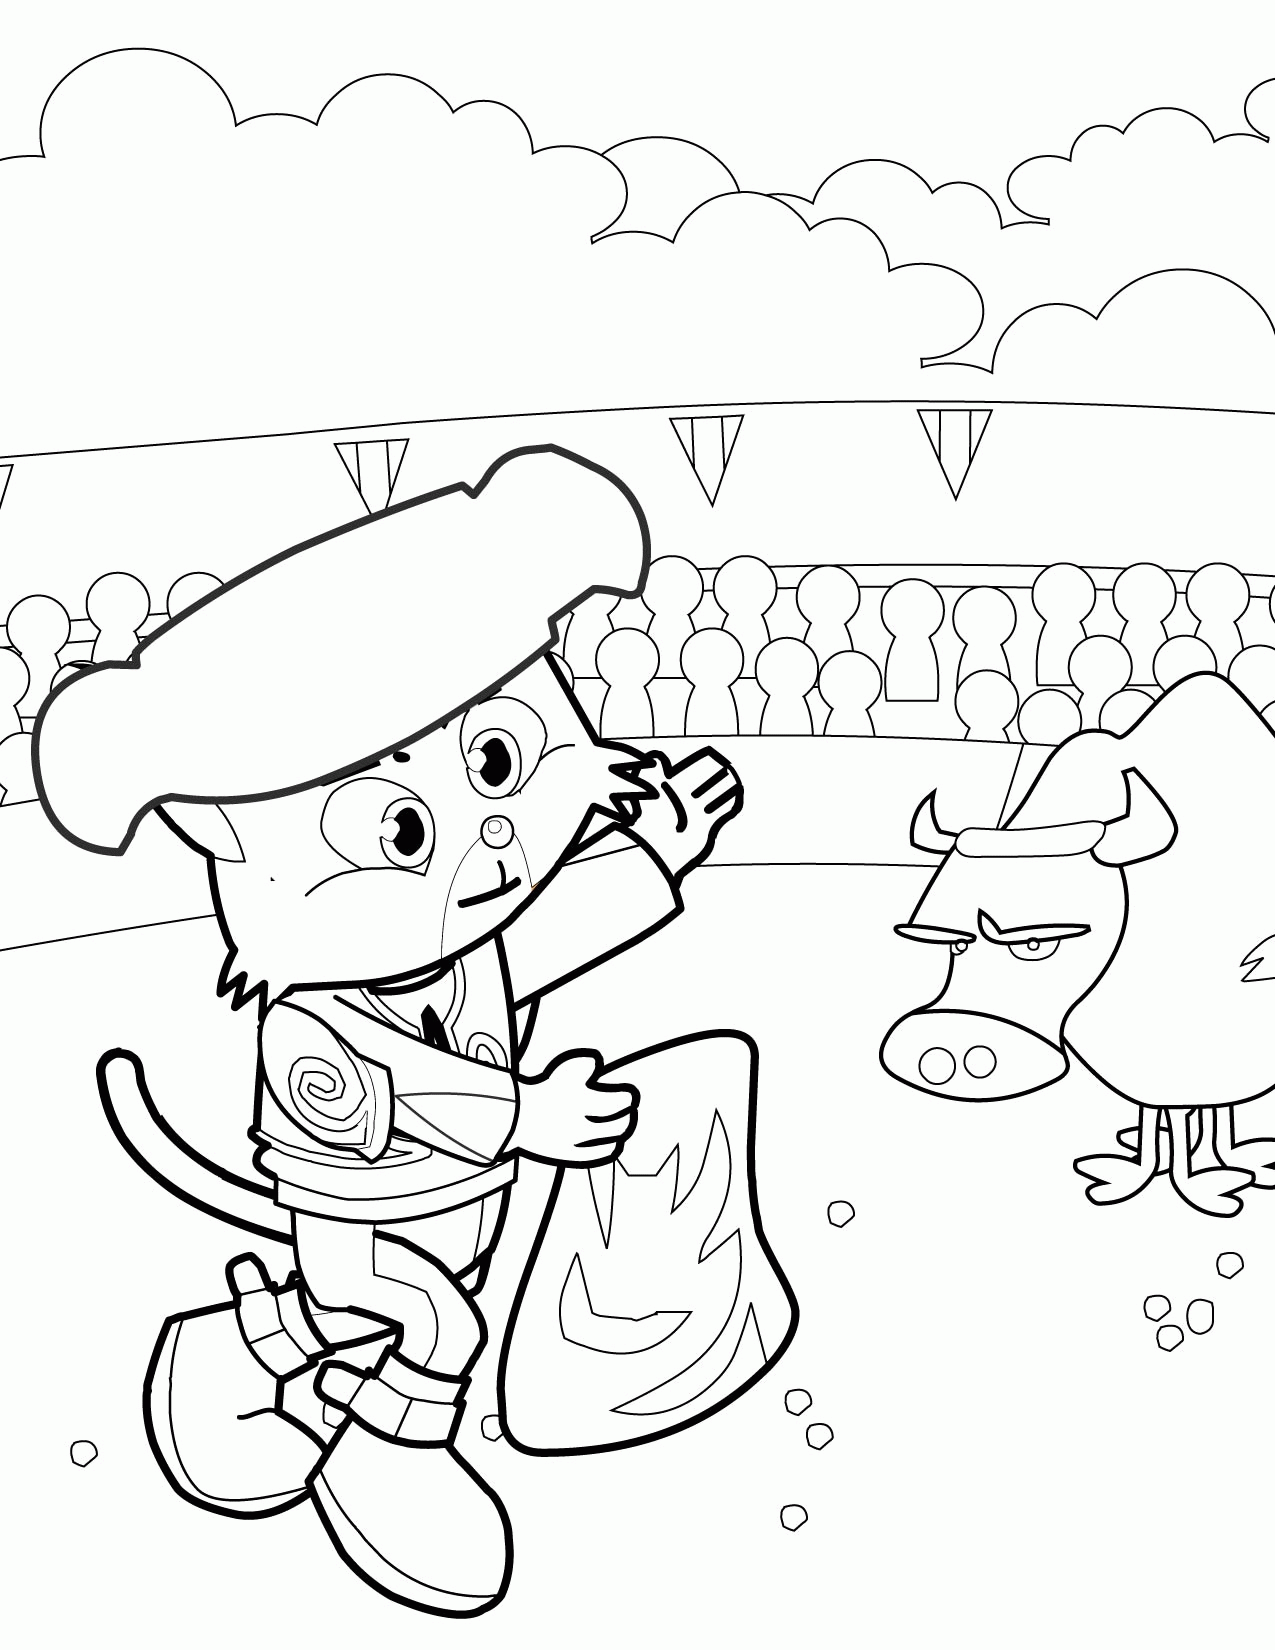 Spanish Bull Fighter Coloring Page - Handipoints